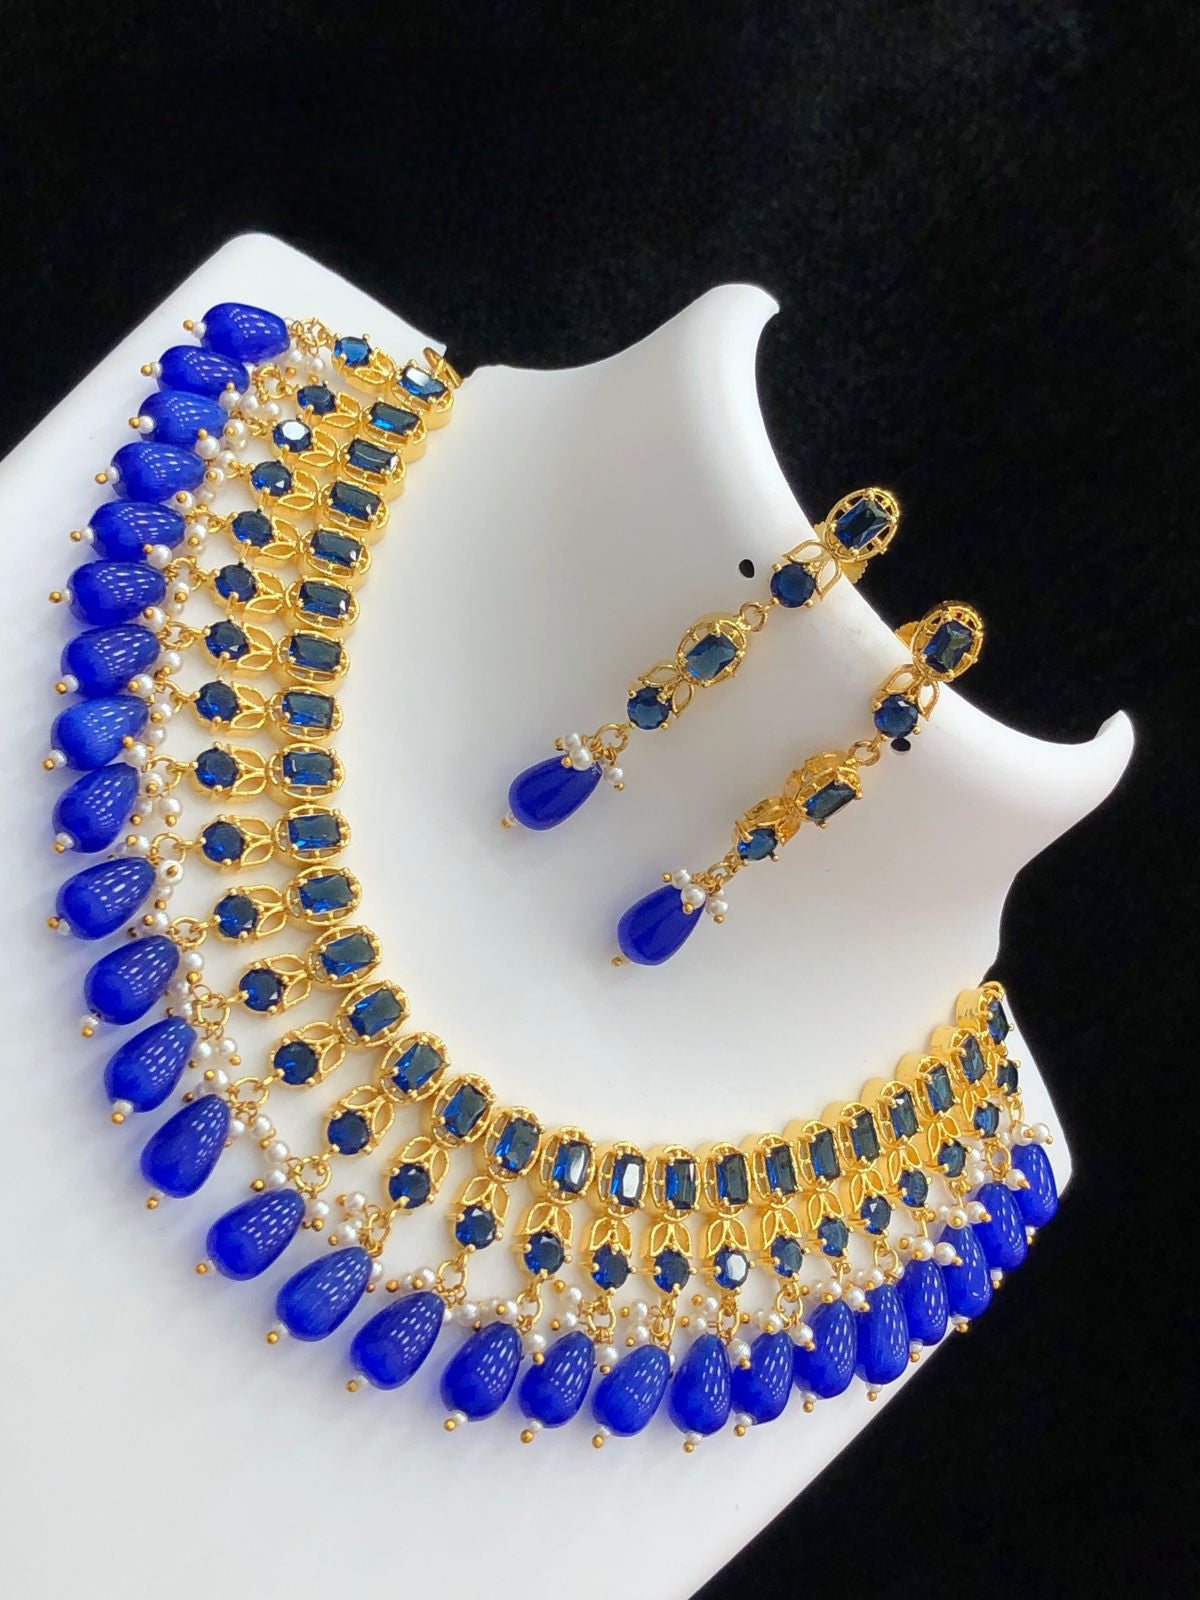 Beaded blue necklace